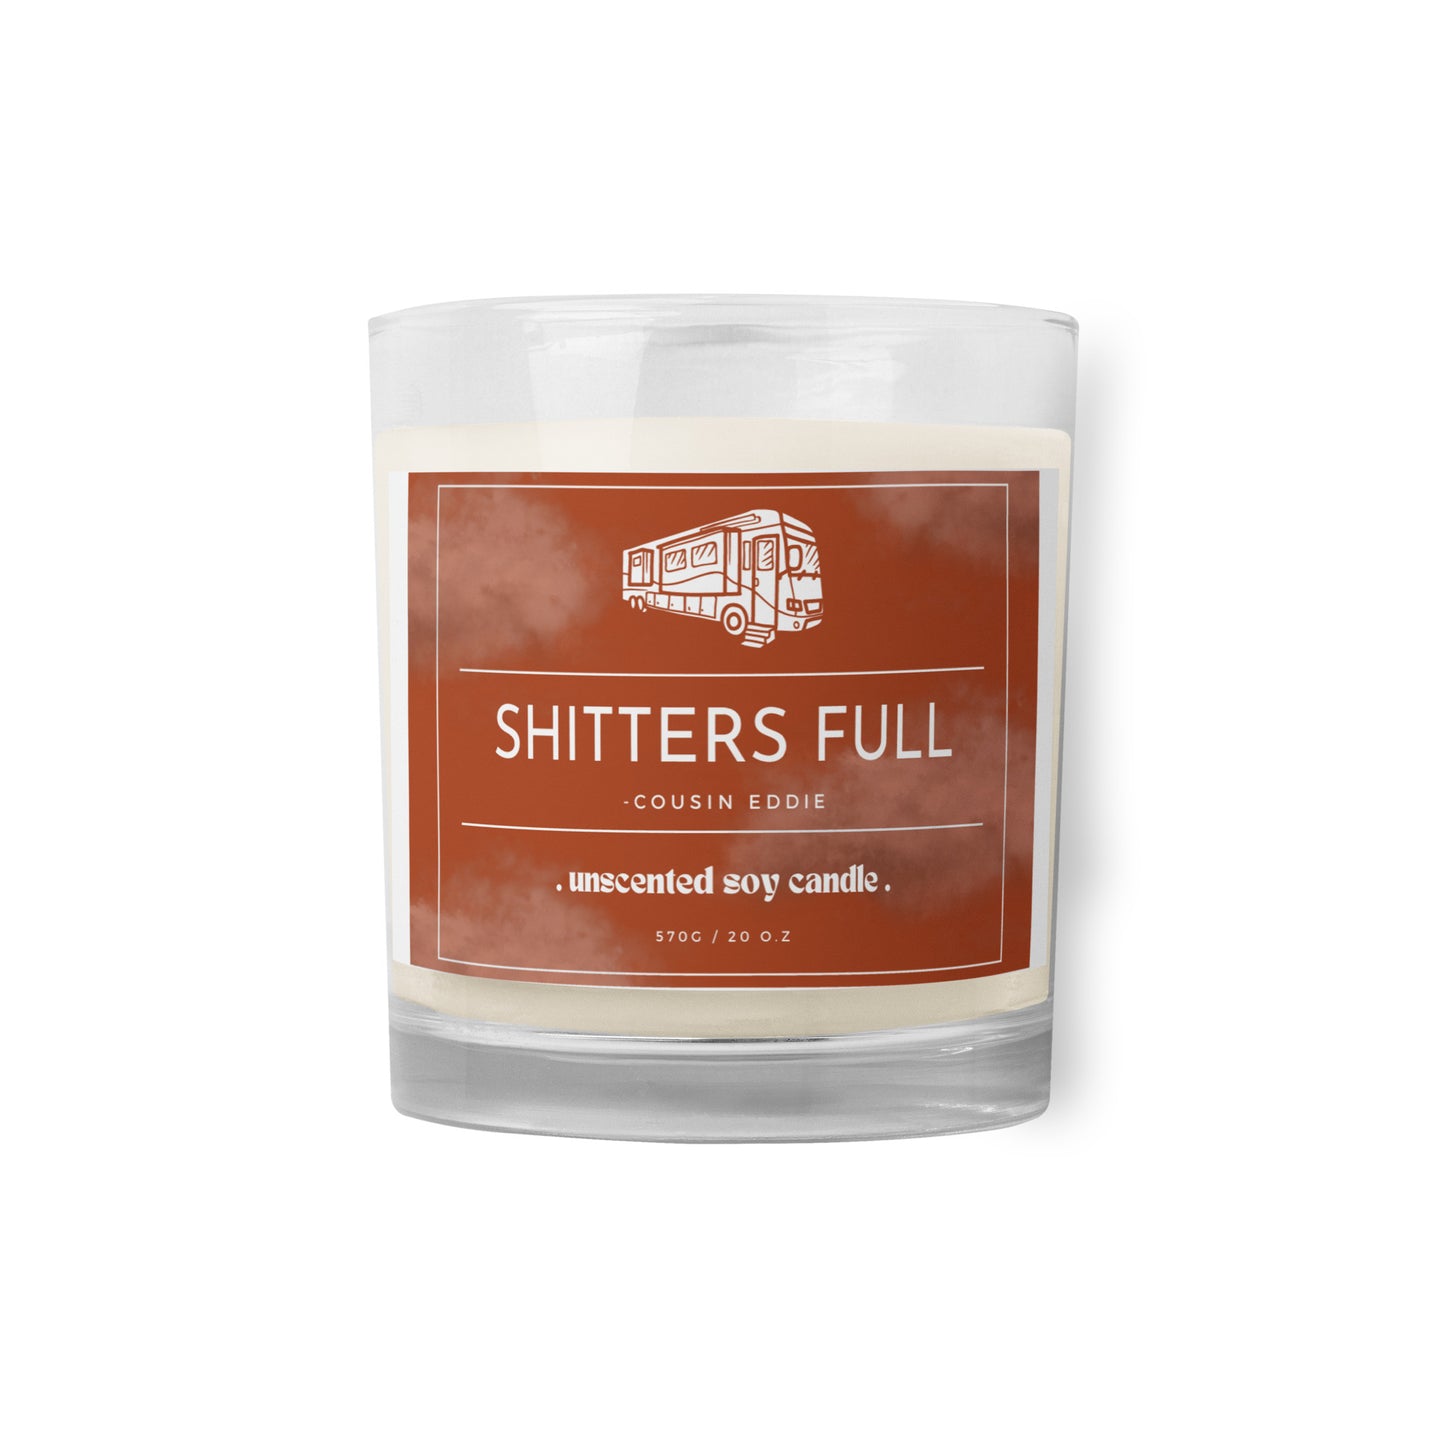 Shitter's Full candle